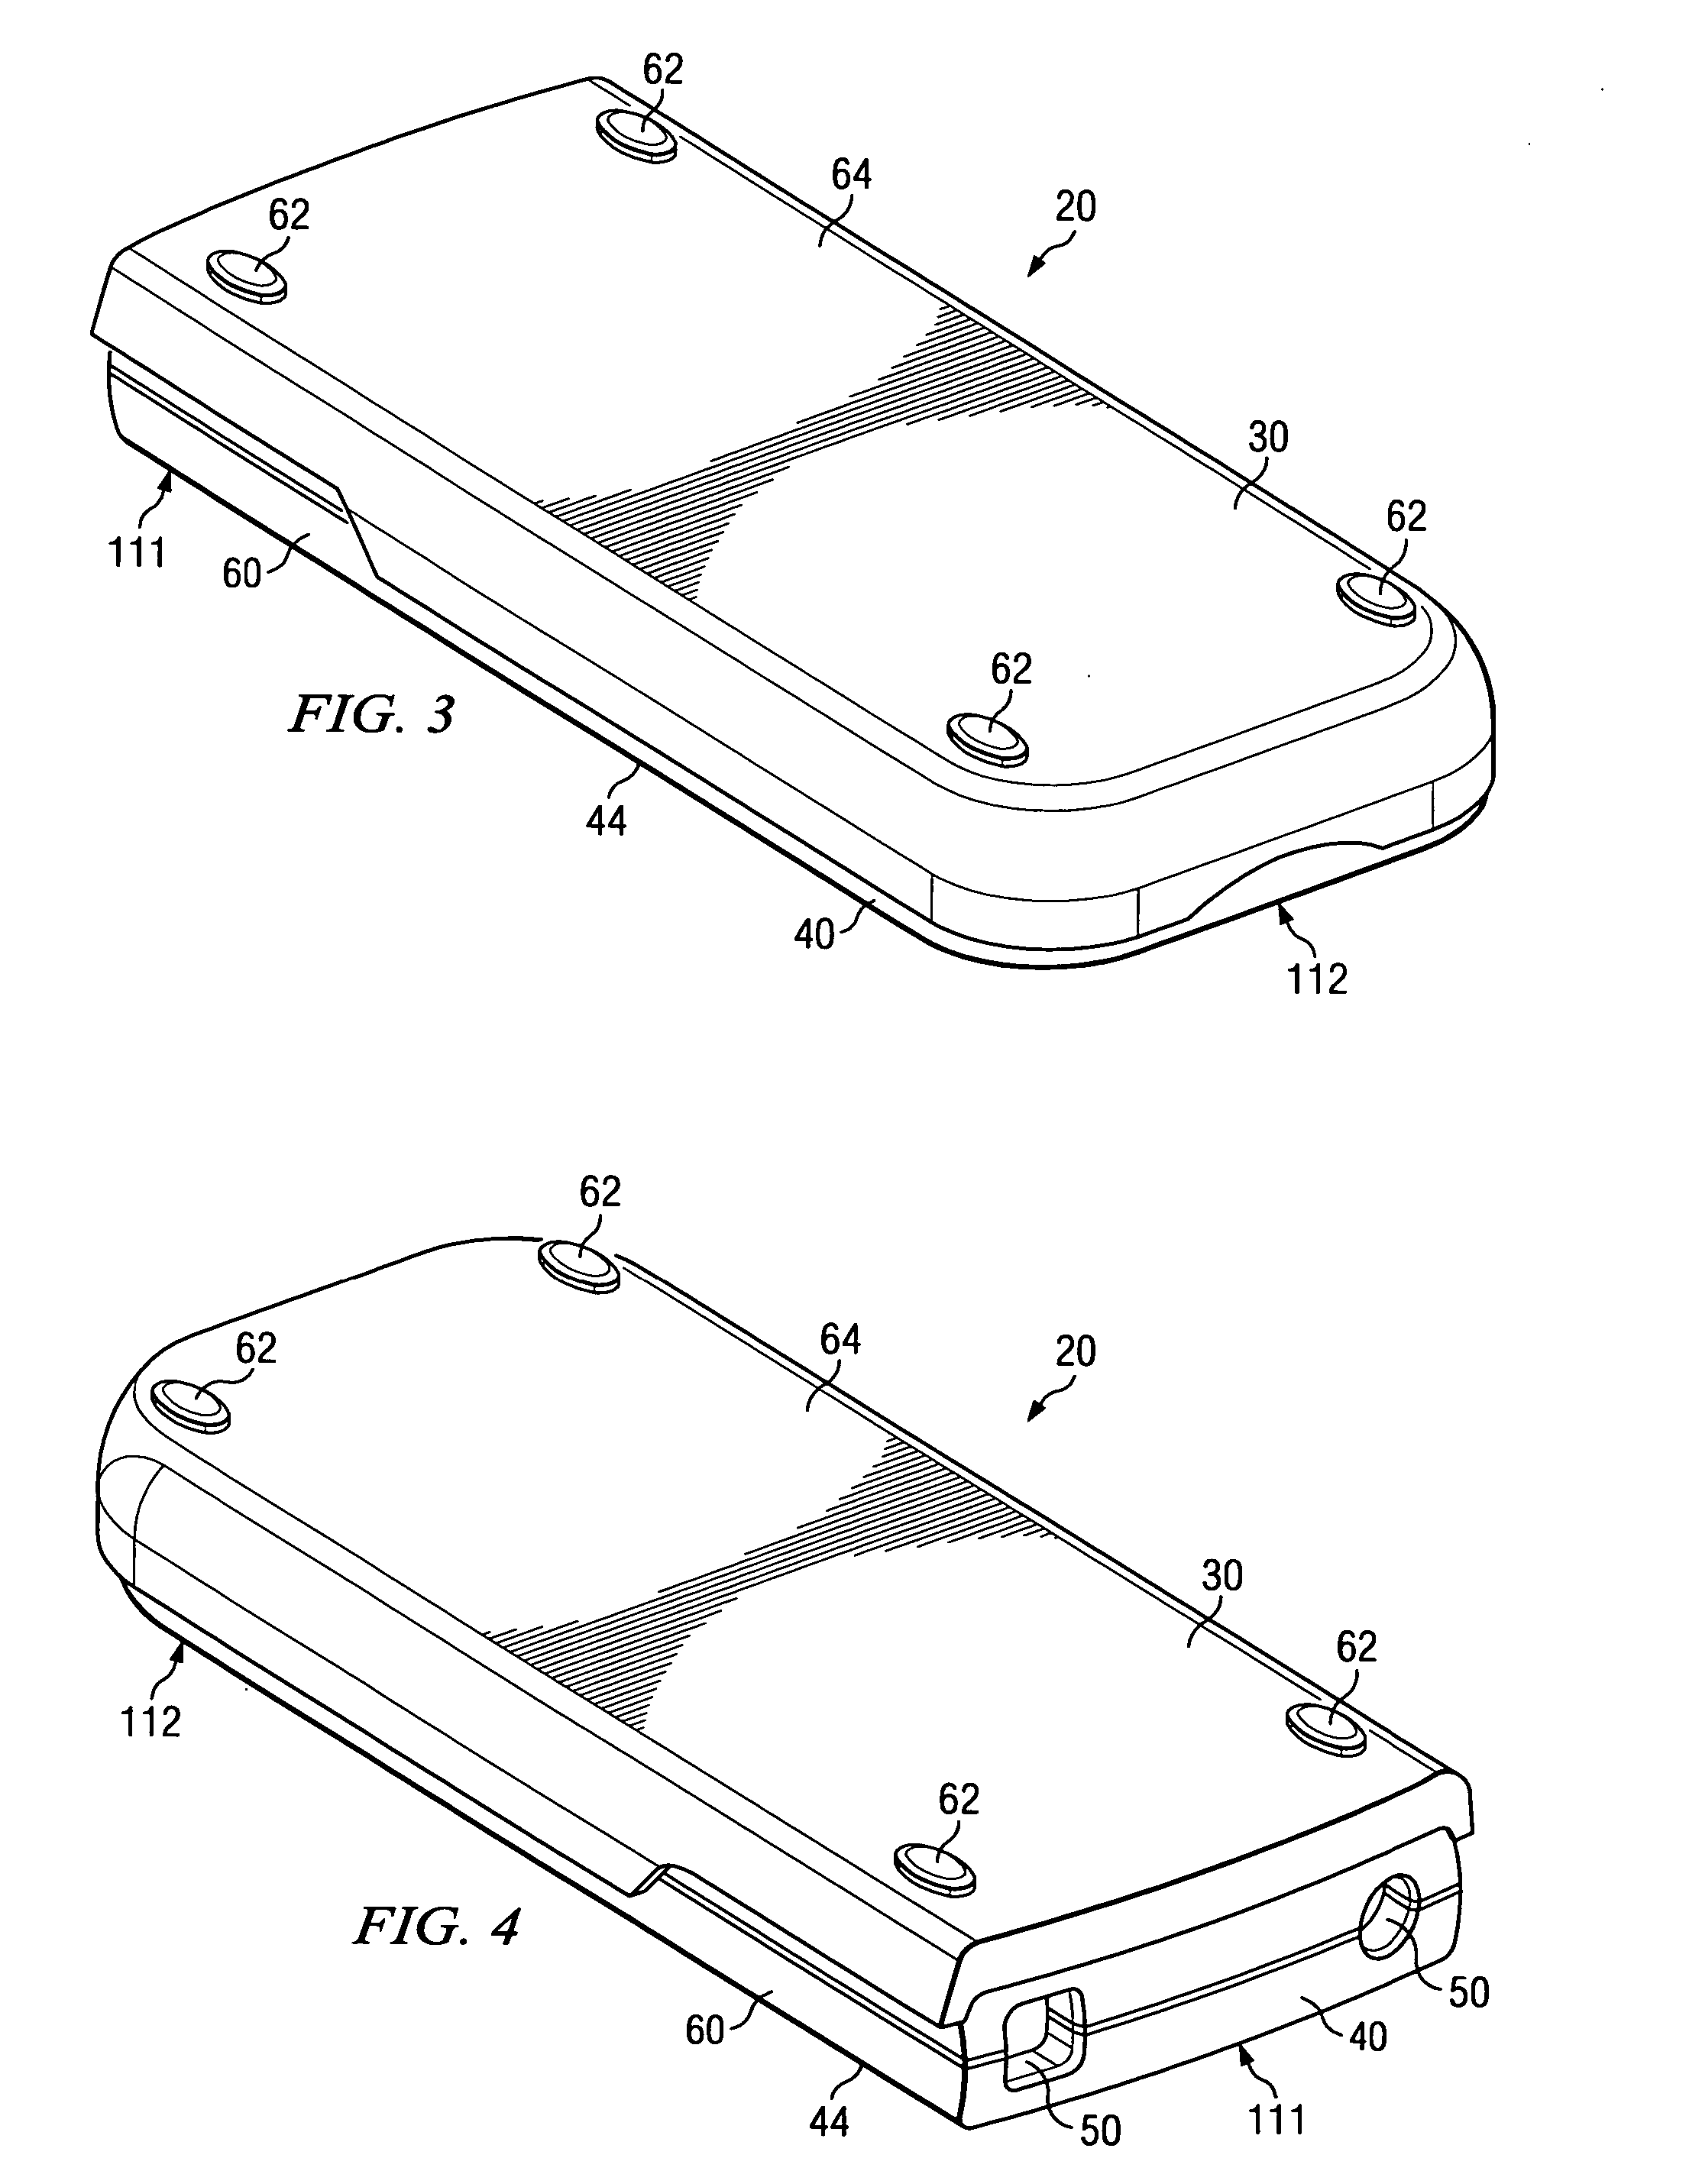 Slide case with pivotable stand member for handheld computing device